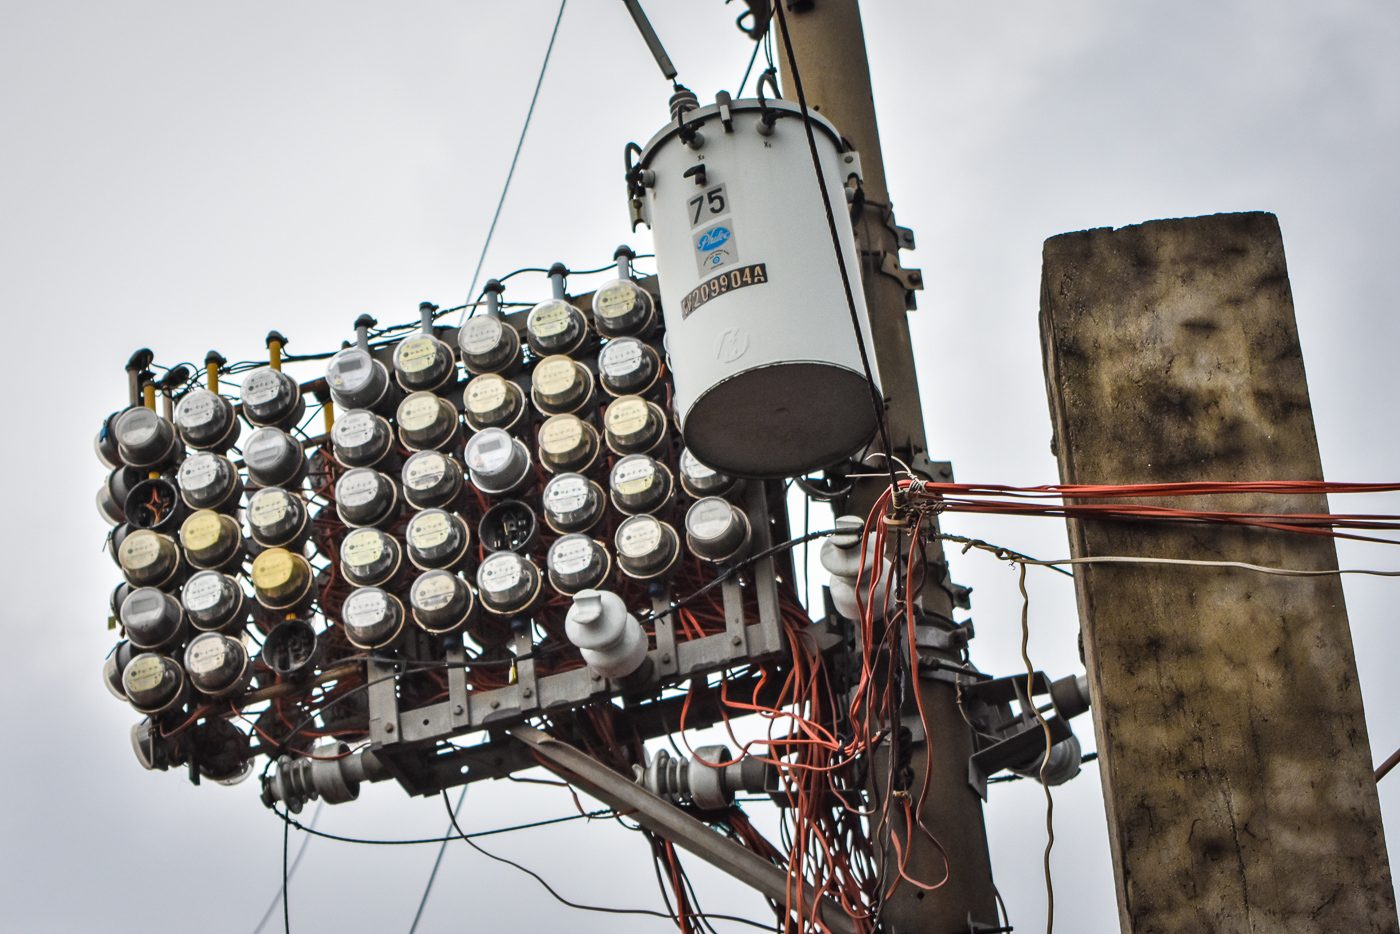 LIST: Power interruptions due to Meralco maintenance in March 2019